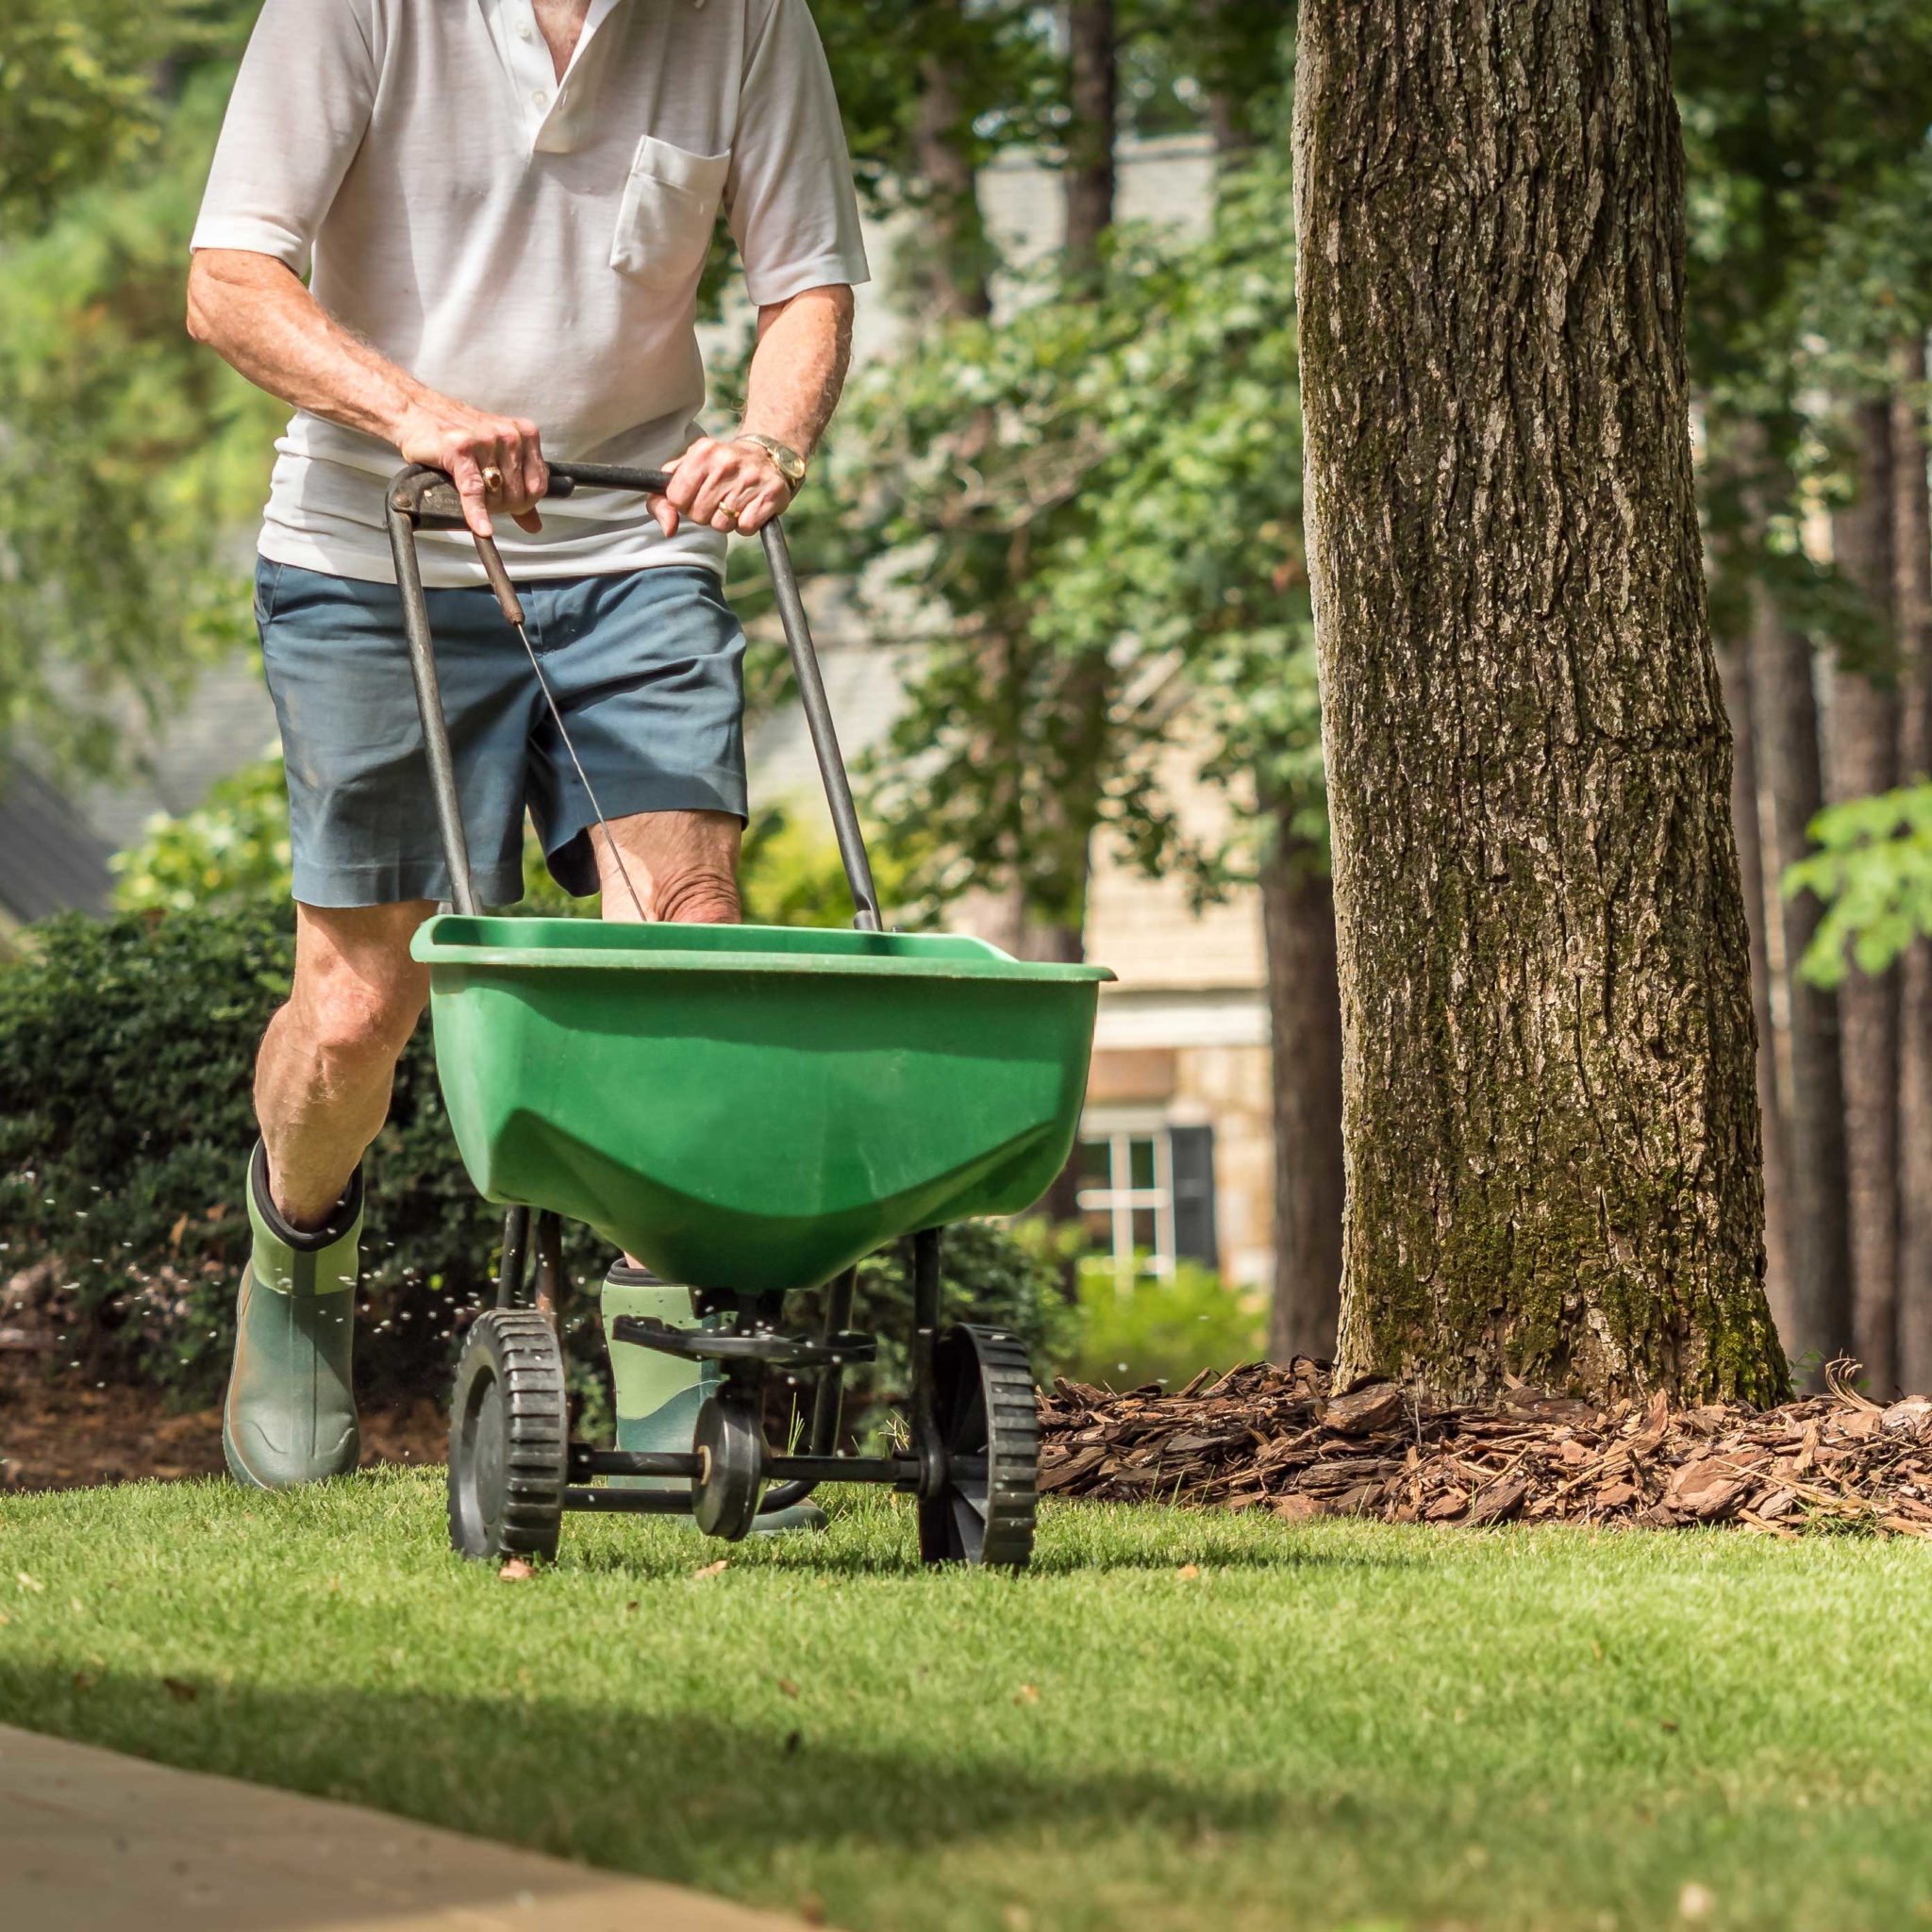 How to Fertilize Your Lawn